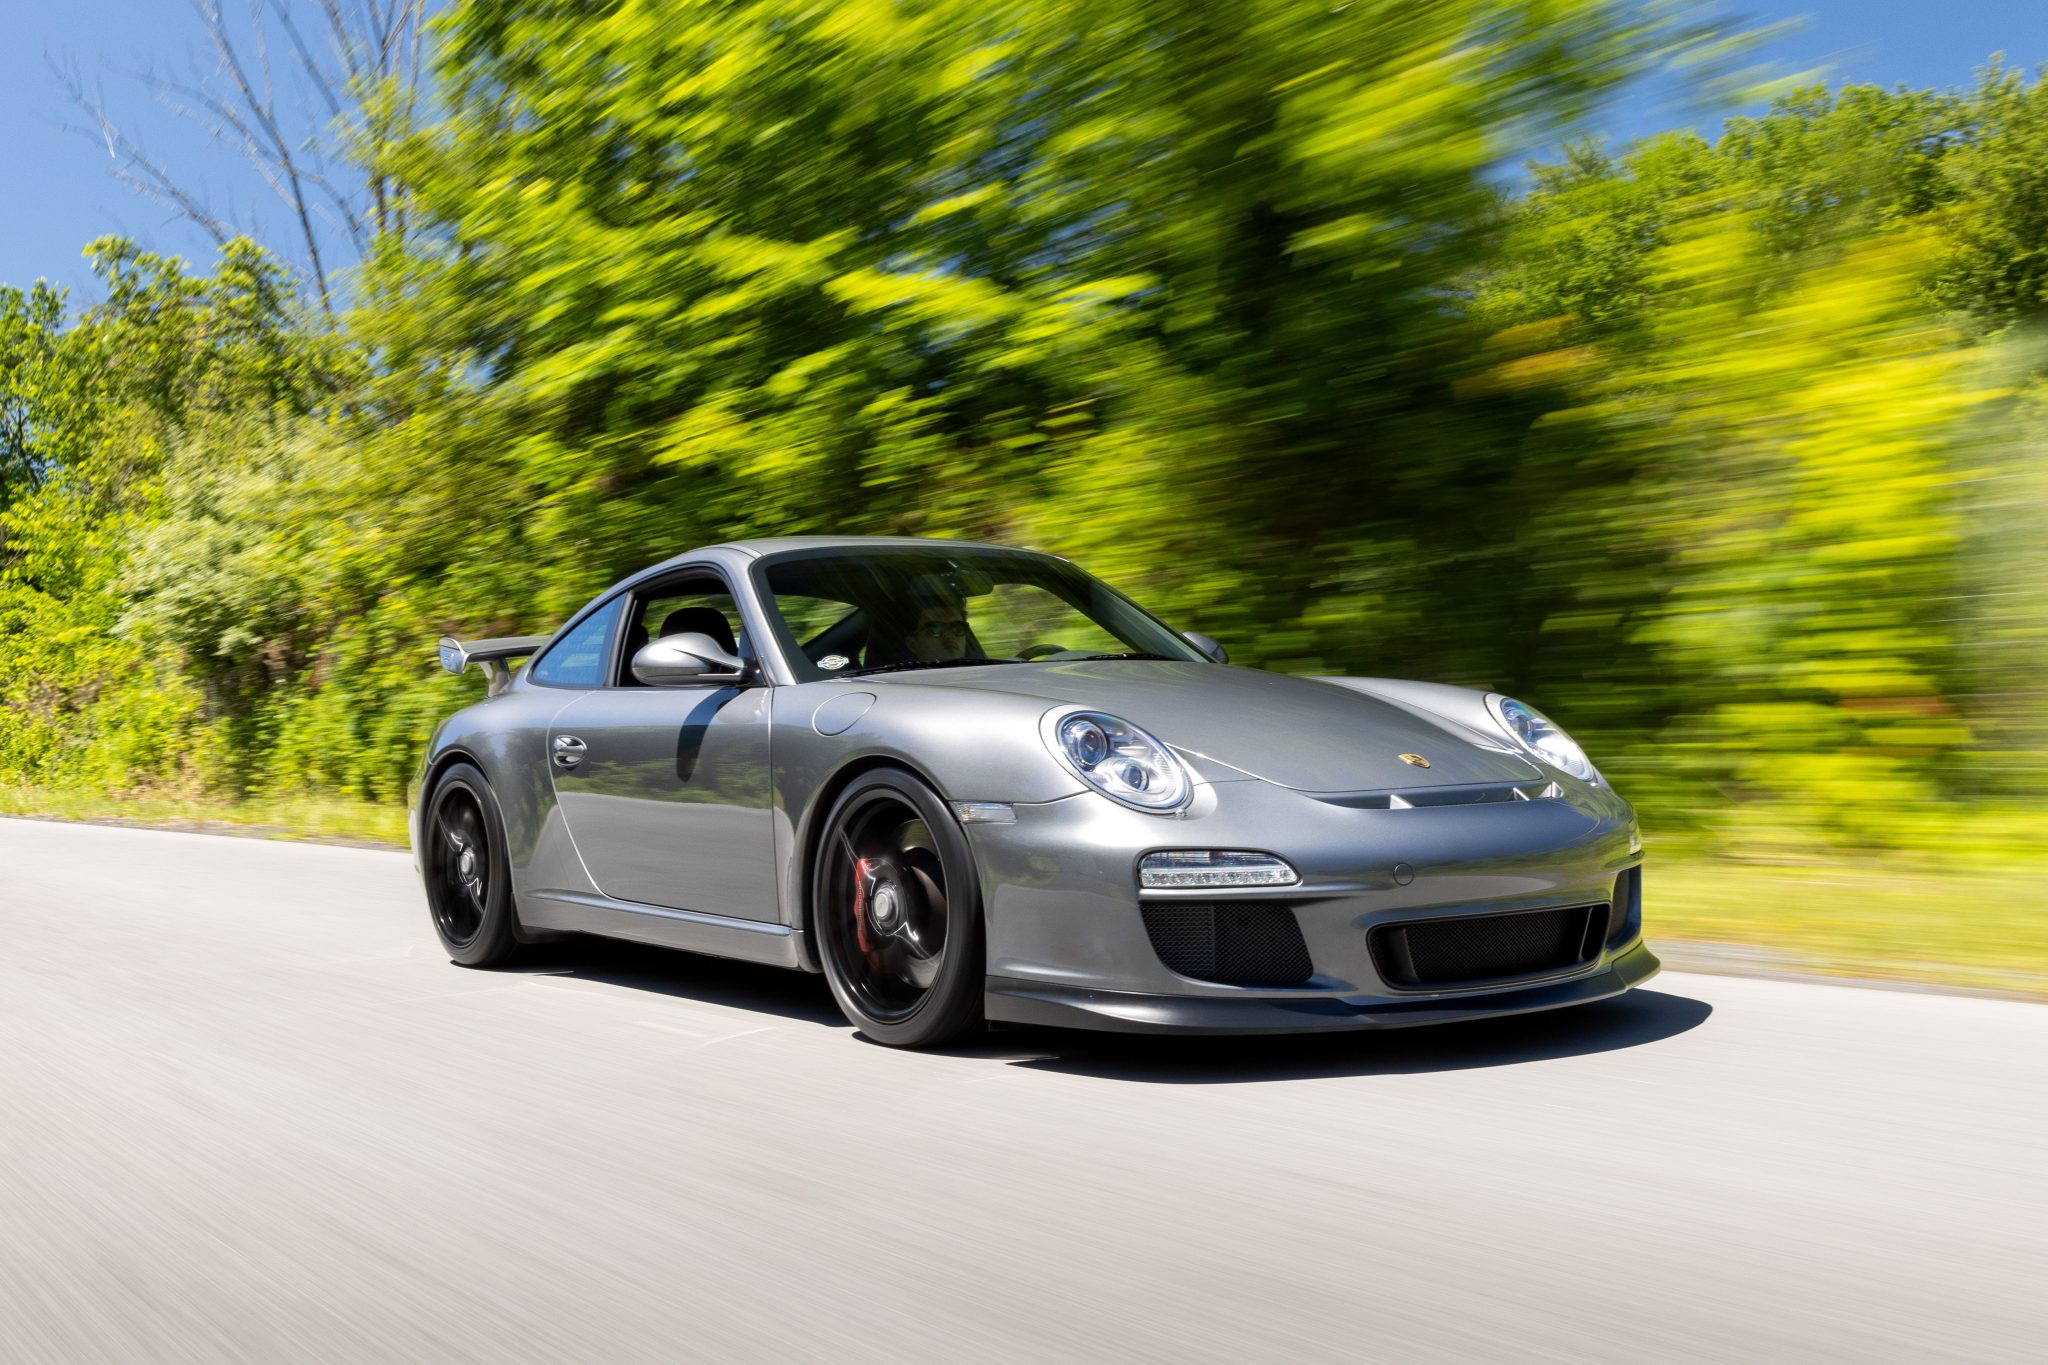 Used 13k-Mile 2010 Porsche 911 GT3 Review